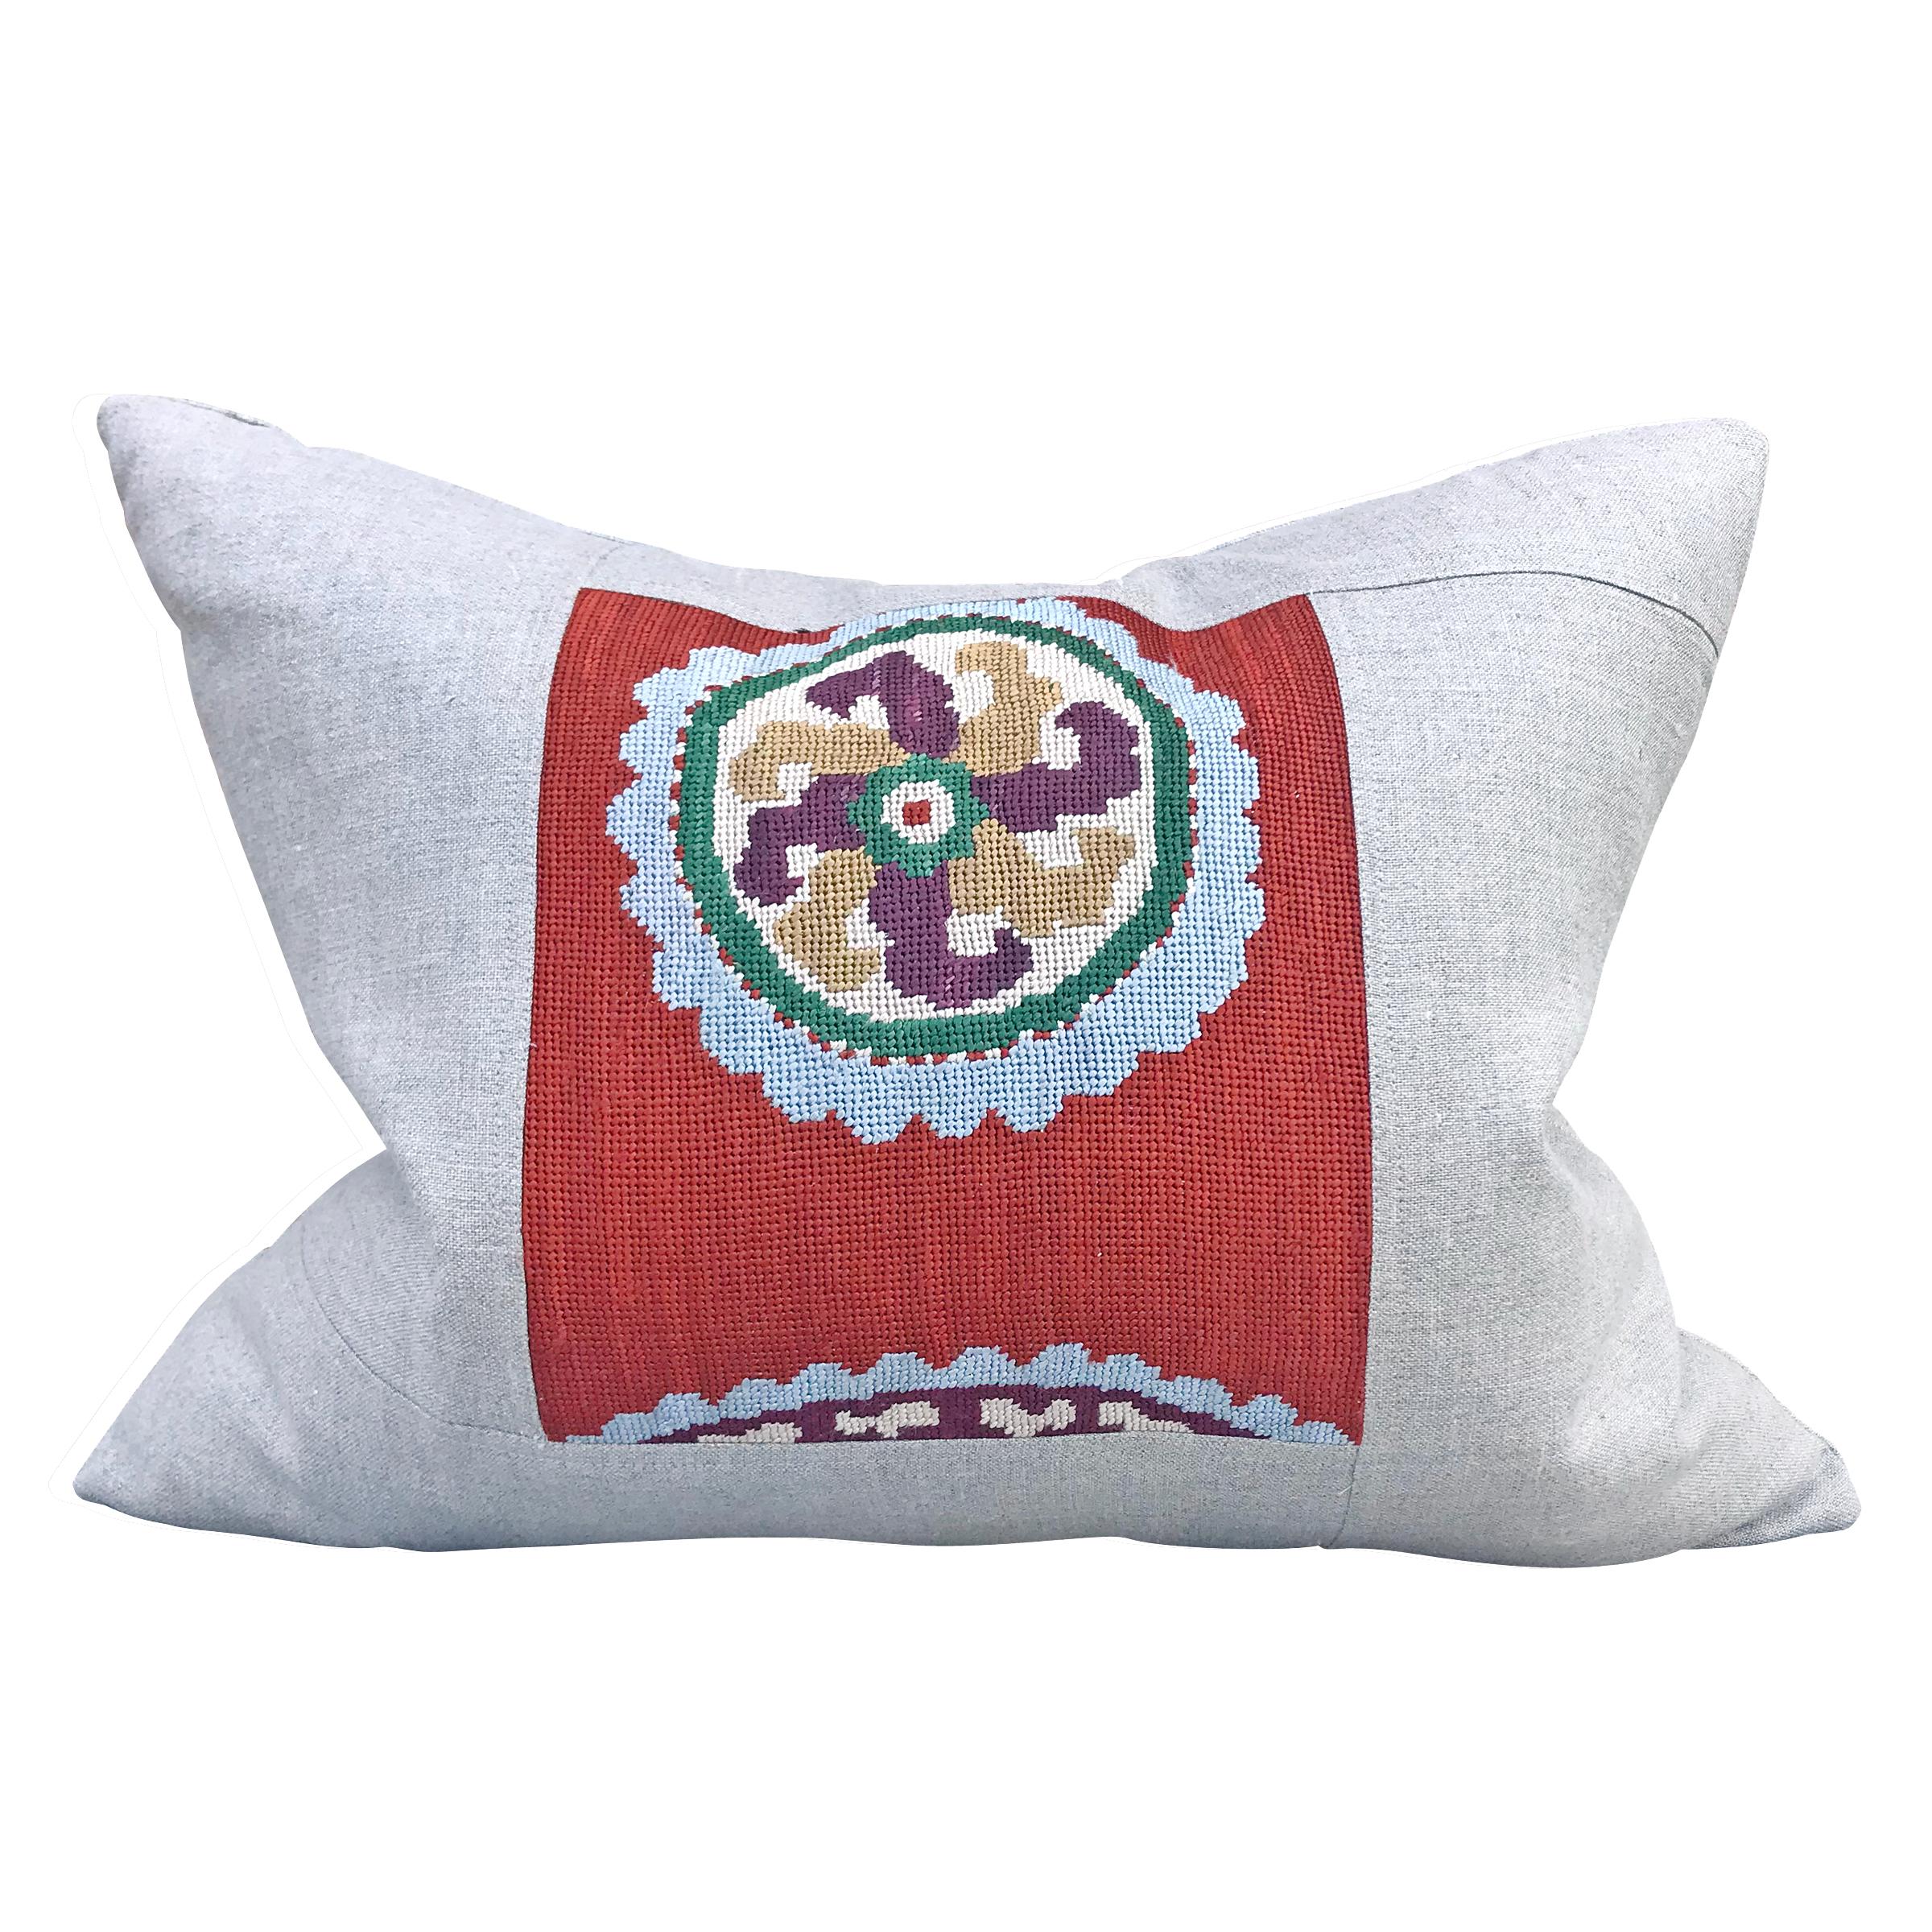 A pair of pillows made from early 20th century Uzbek folk embroidered panels with a lovely stylized floral pattern, framed and backed with linen, filled with down.